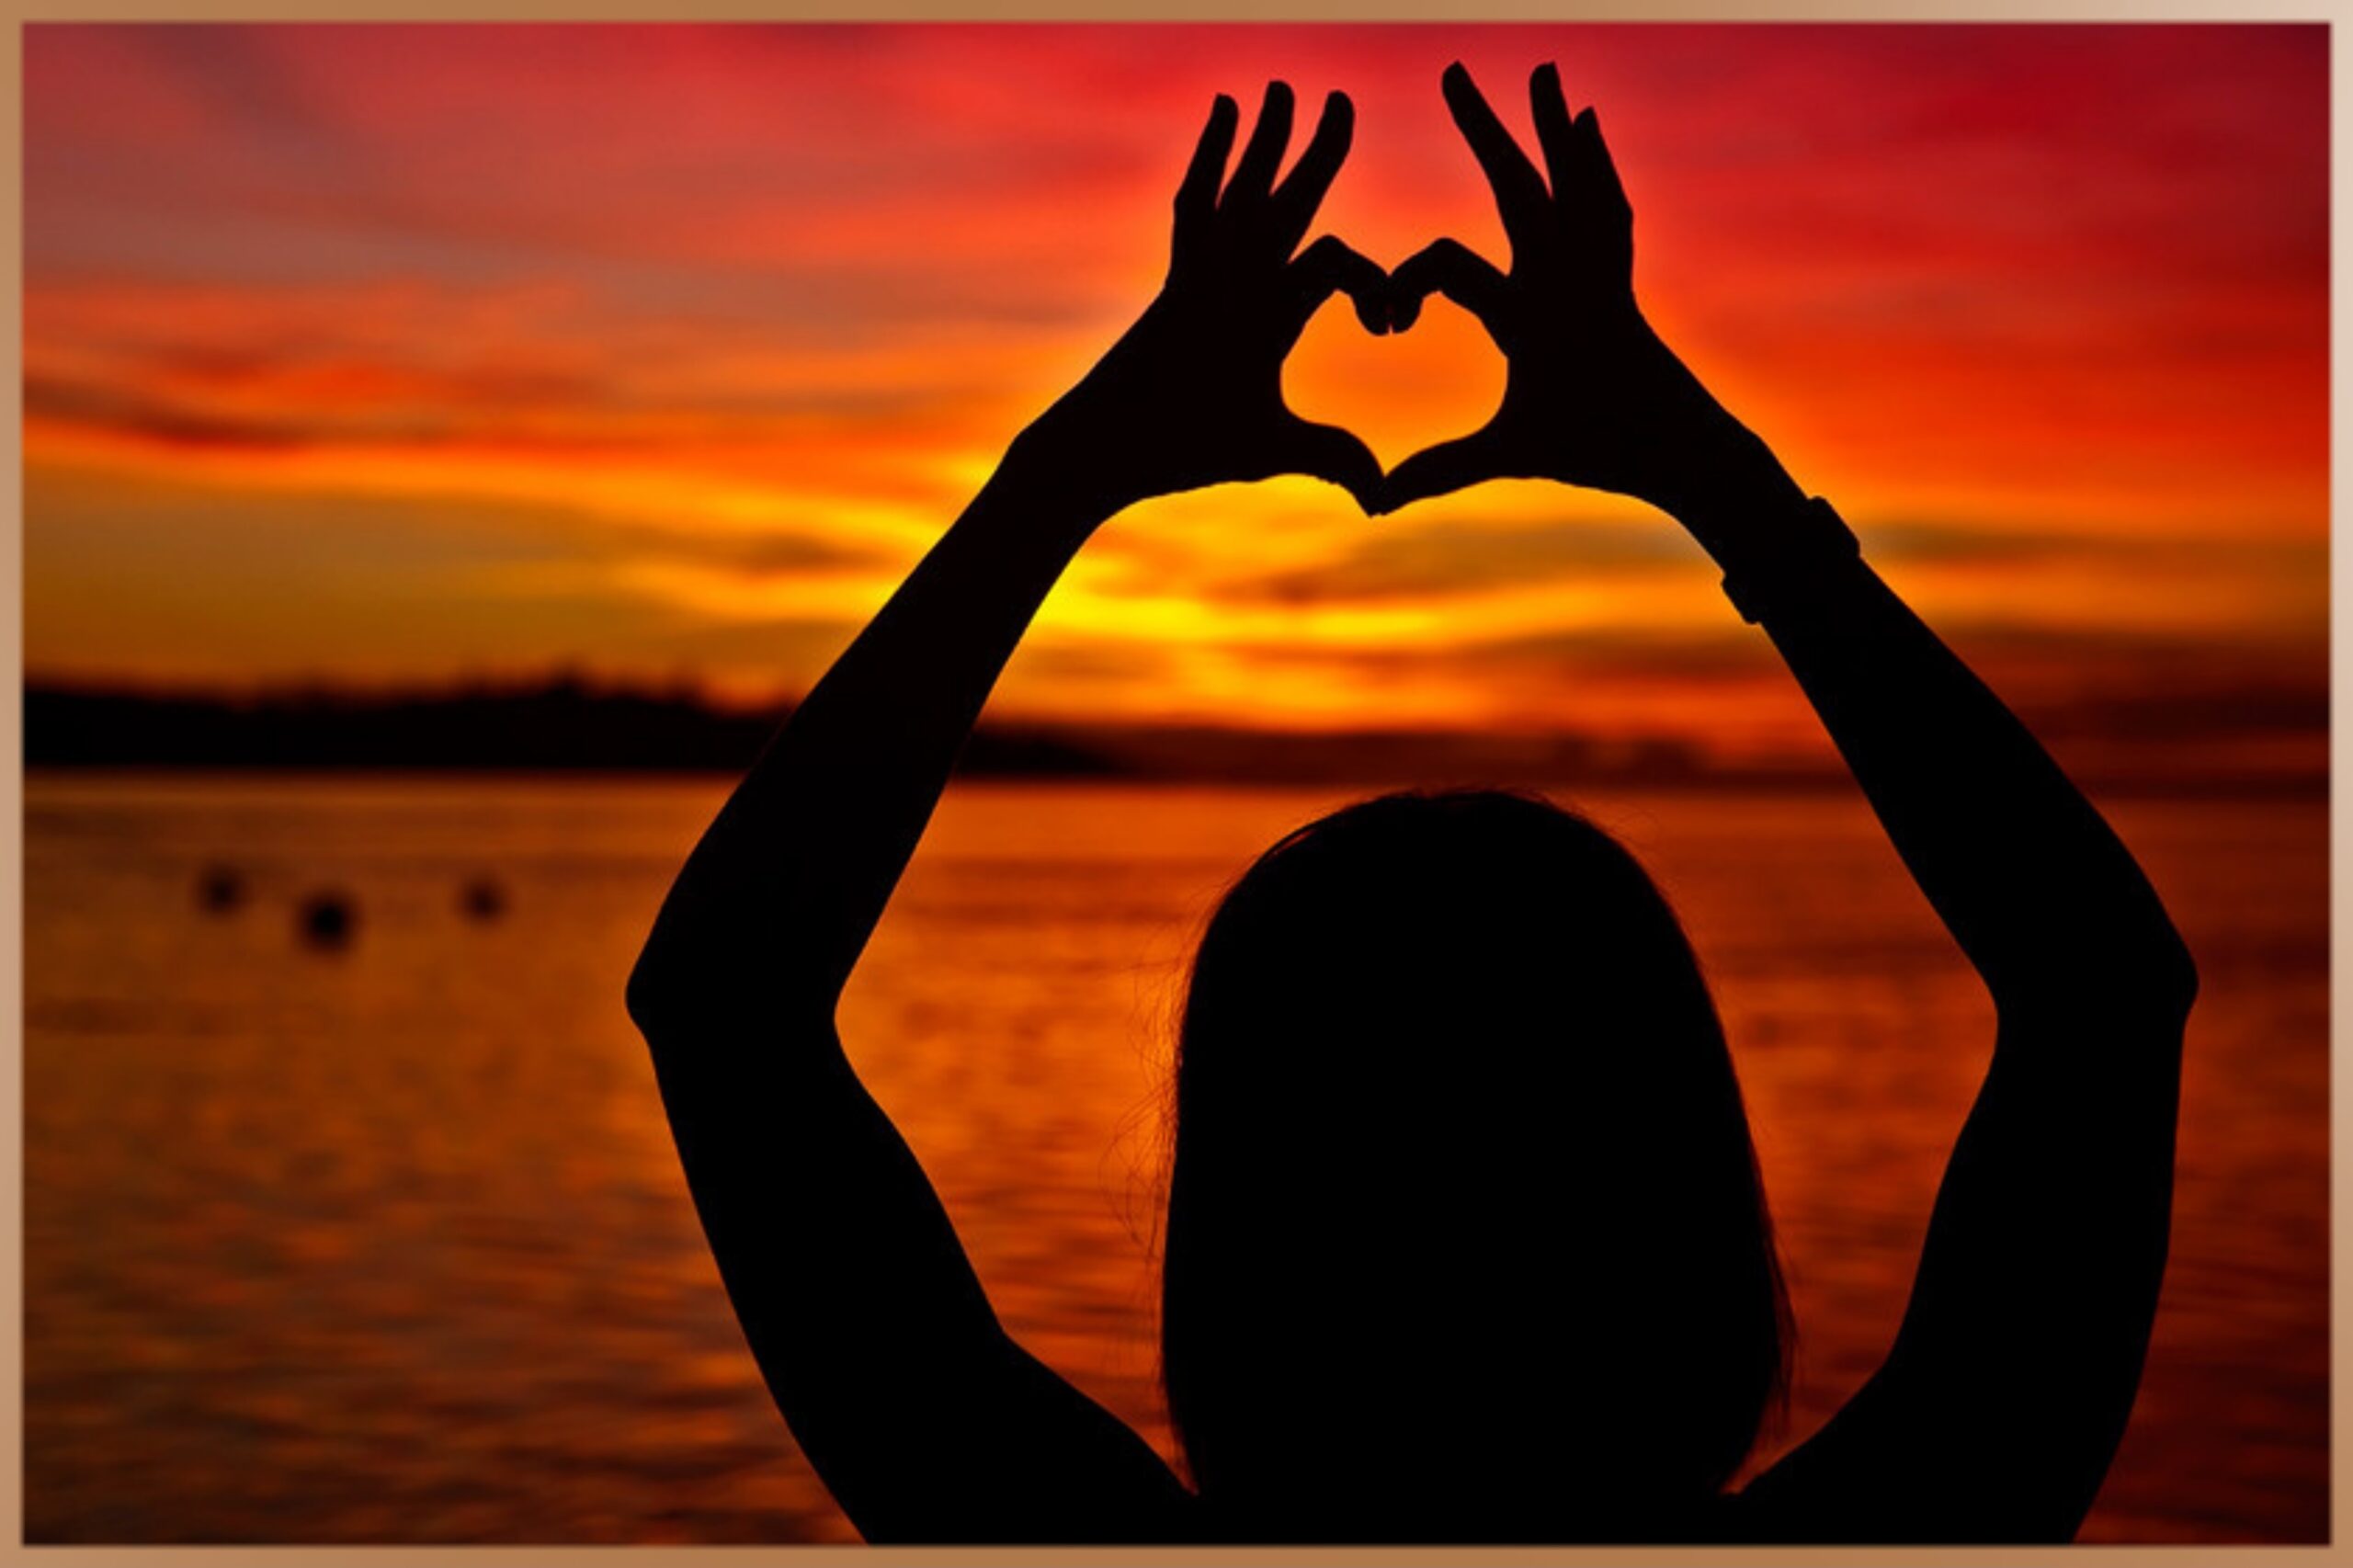 Woman shows heart with her hands during sunset at the beach